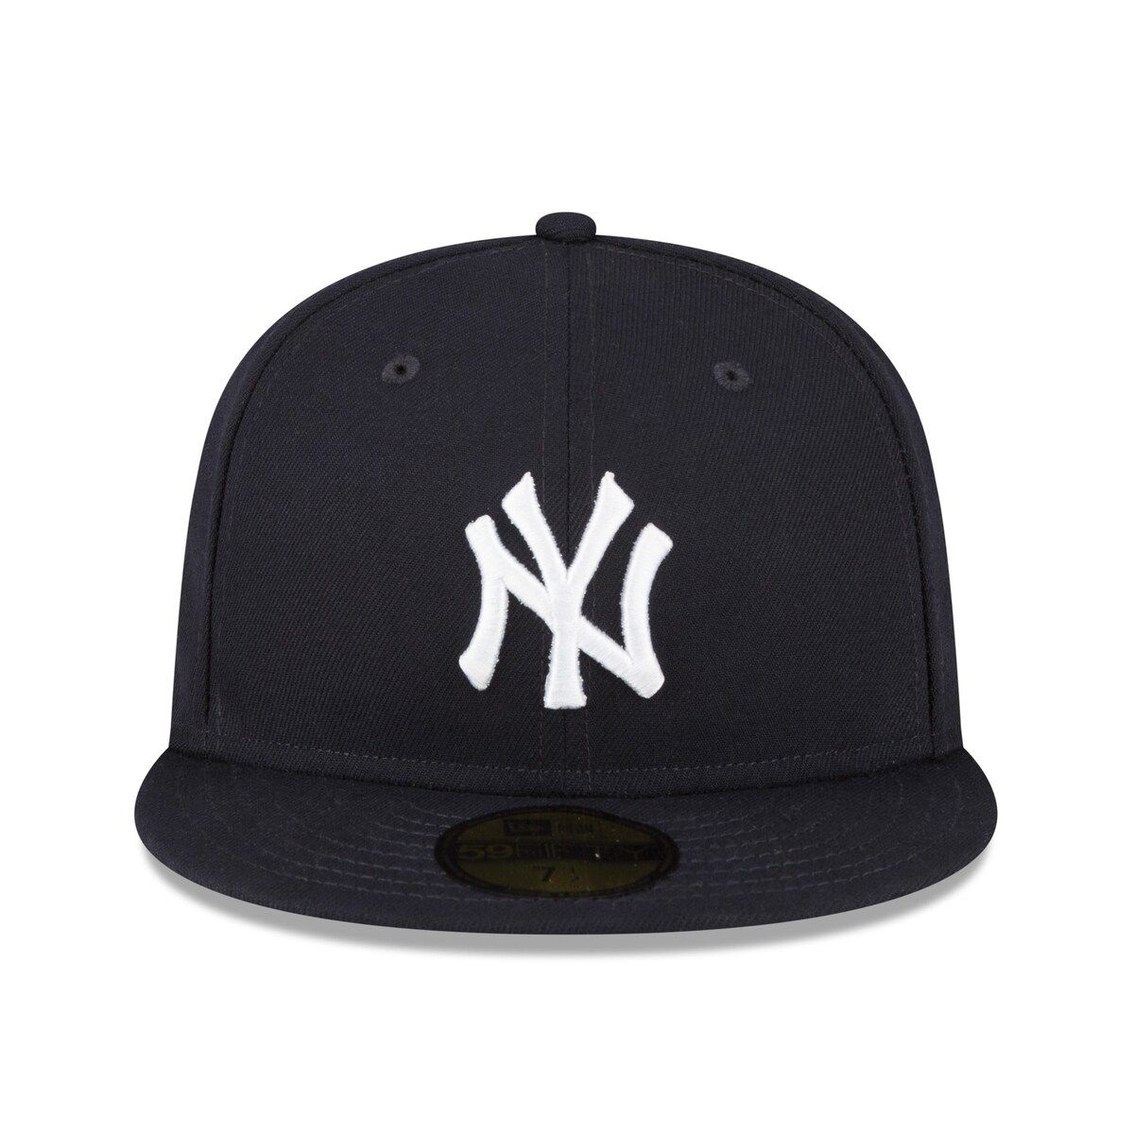 New Era Men's Navy New York Yankees Authentic Collection Replica 59FIFTY Fitted Hat - Image 3 of 4